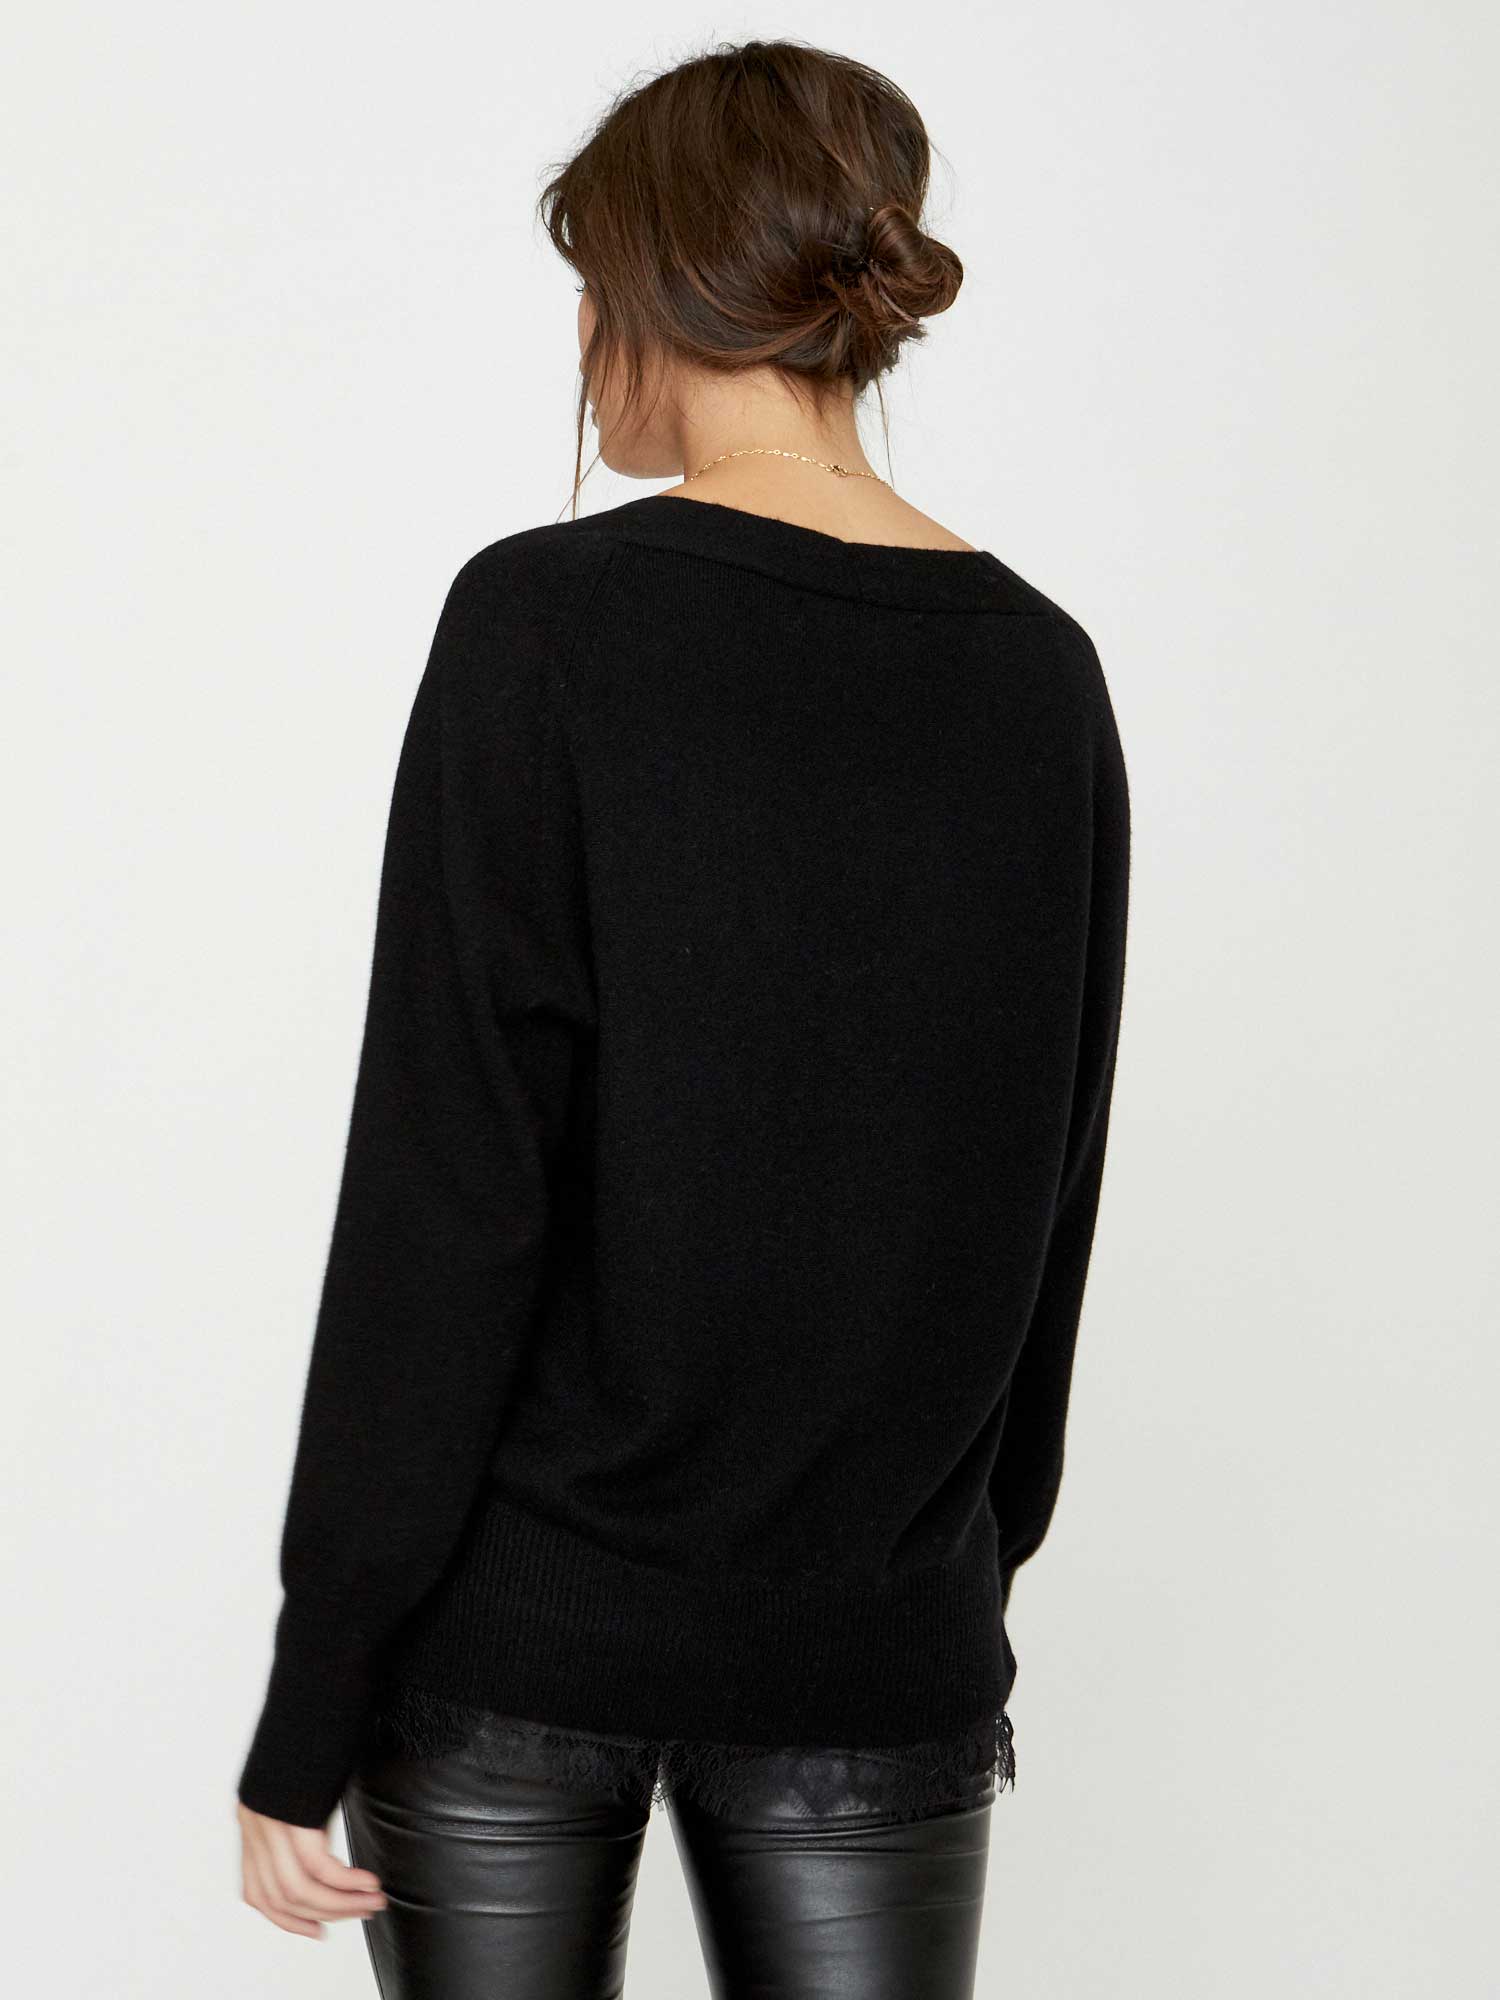 Black lace layered v-neck sweater back view